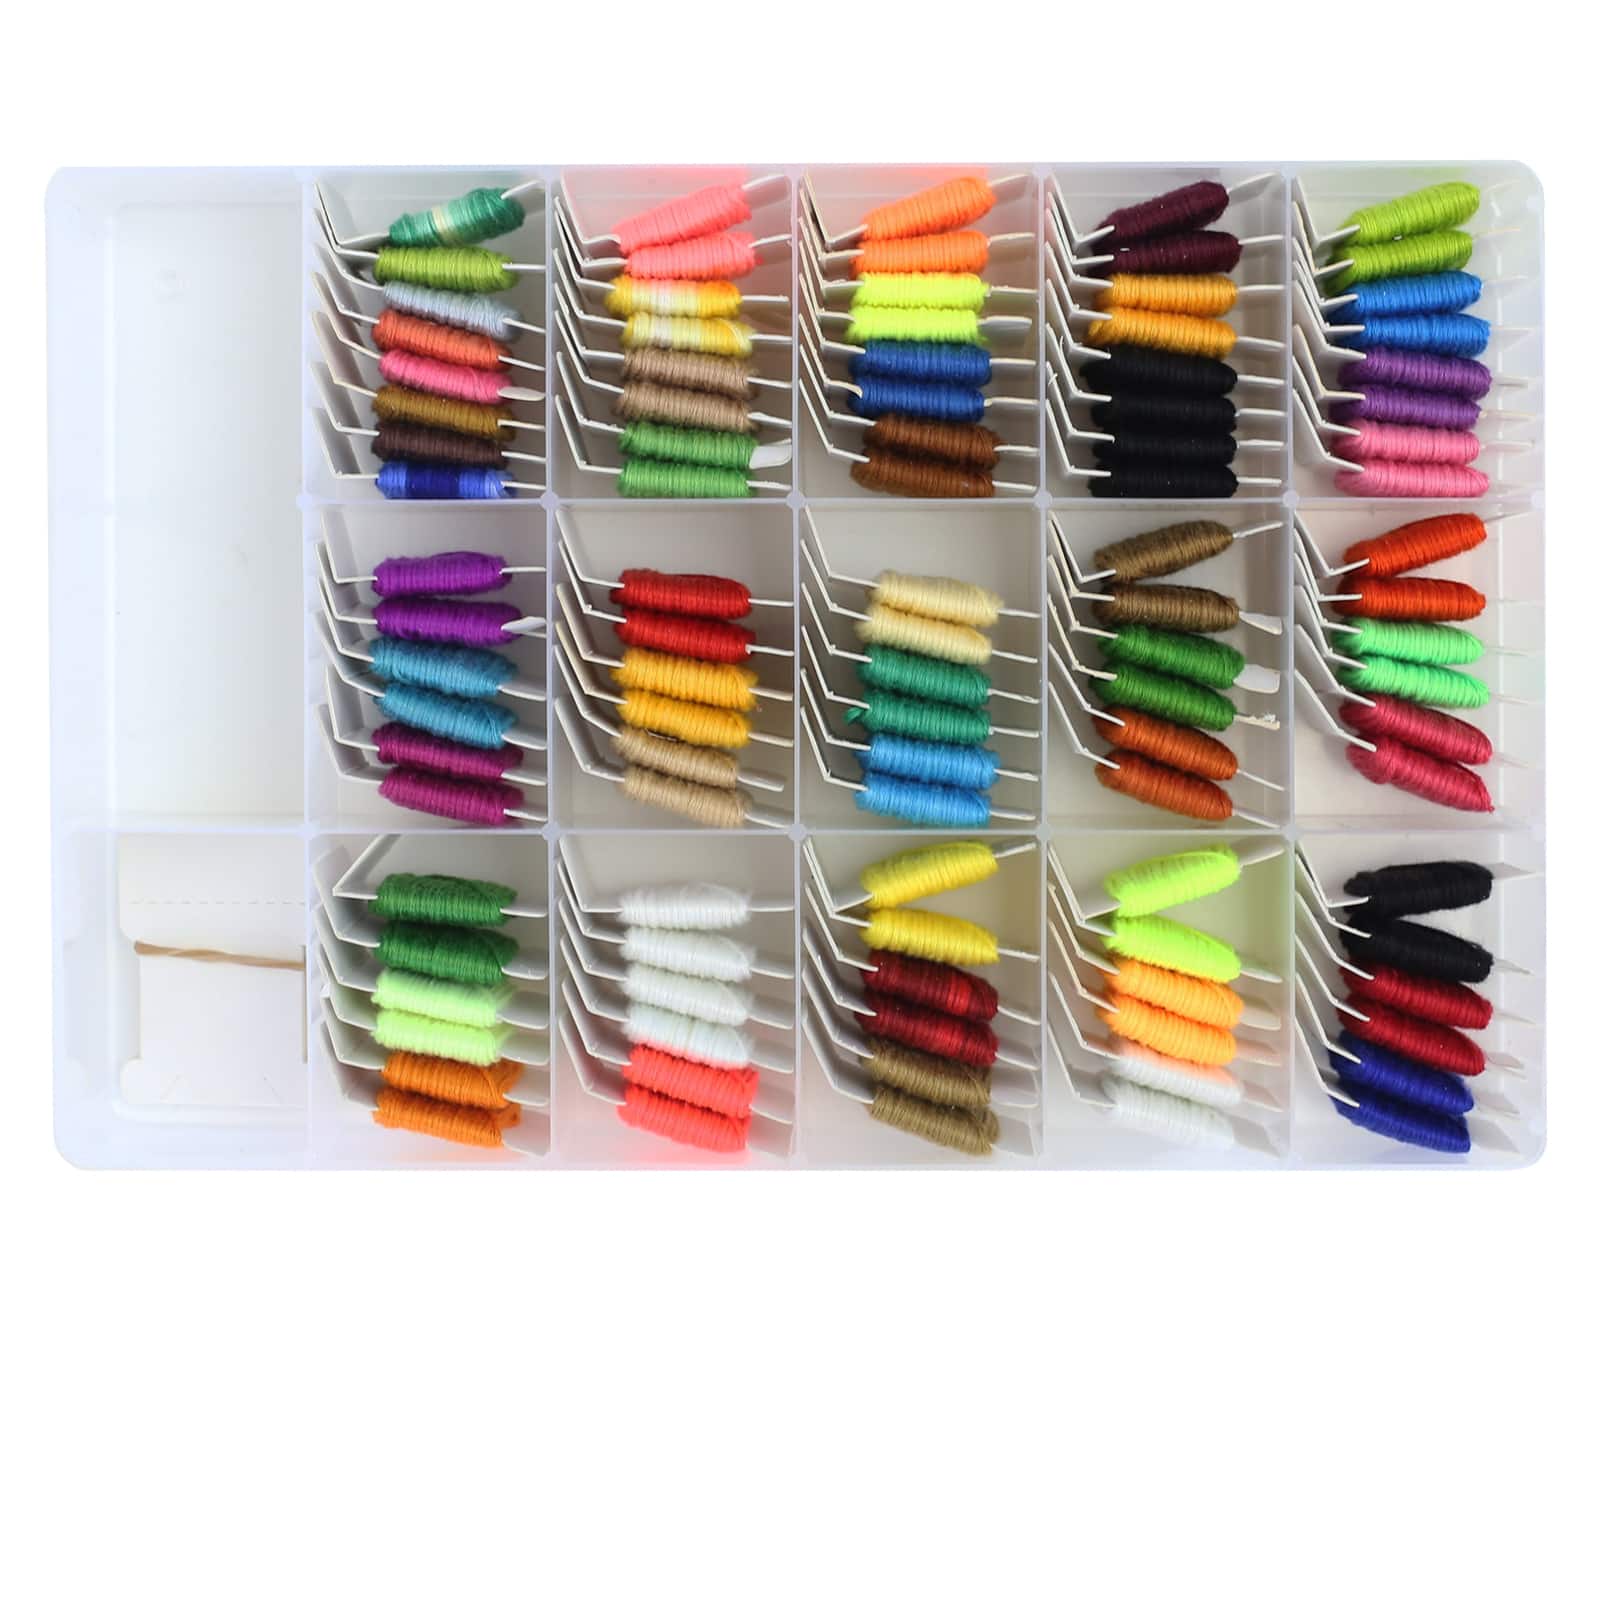 Embroidery Floss 218pcs Embroidery Thread String Kits with Organizer  Storage Box